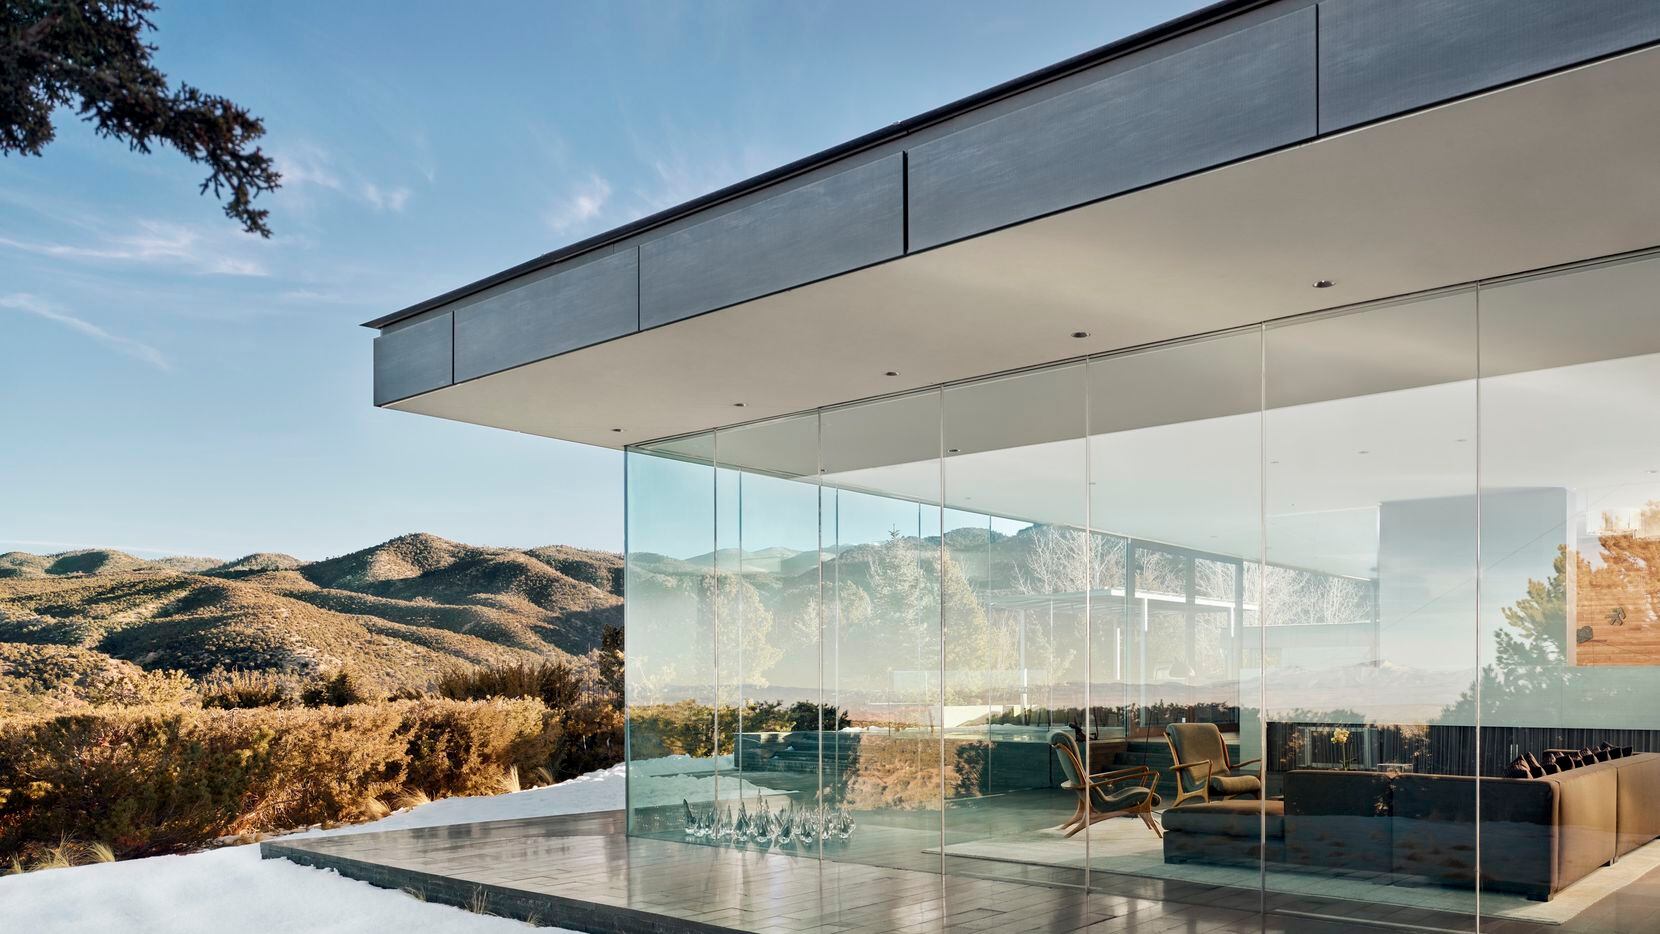 Residence by Studio DuBois from Contemporary Design in the High Desert, by Helen Thomson.